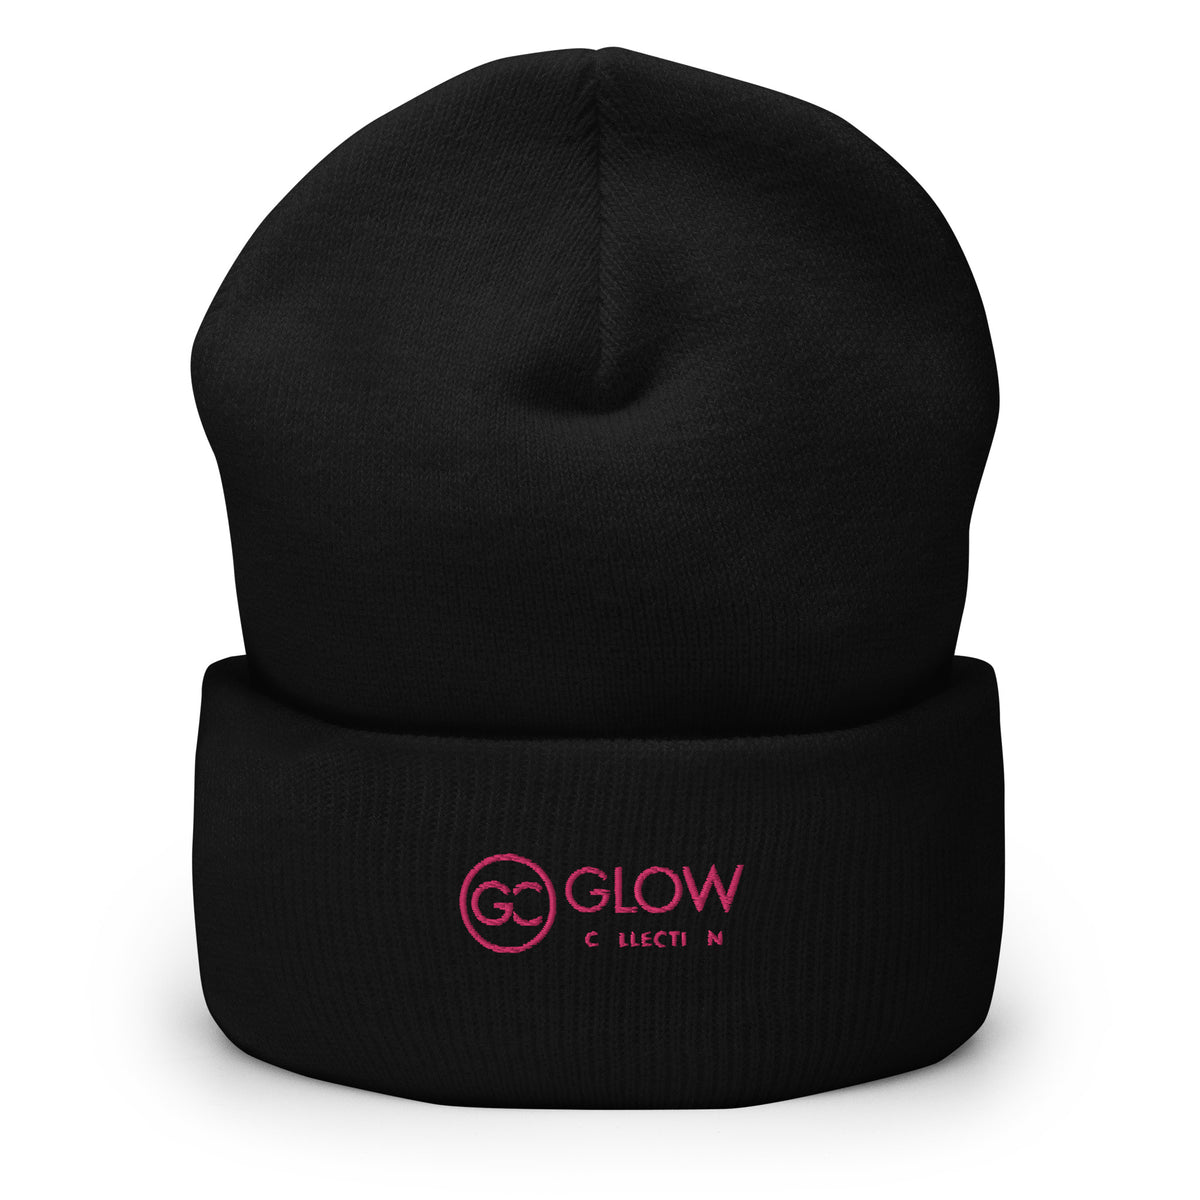 Glow Collection Cuffed Beanie